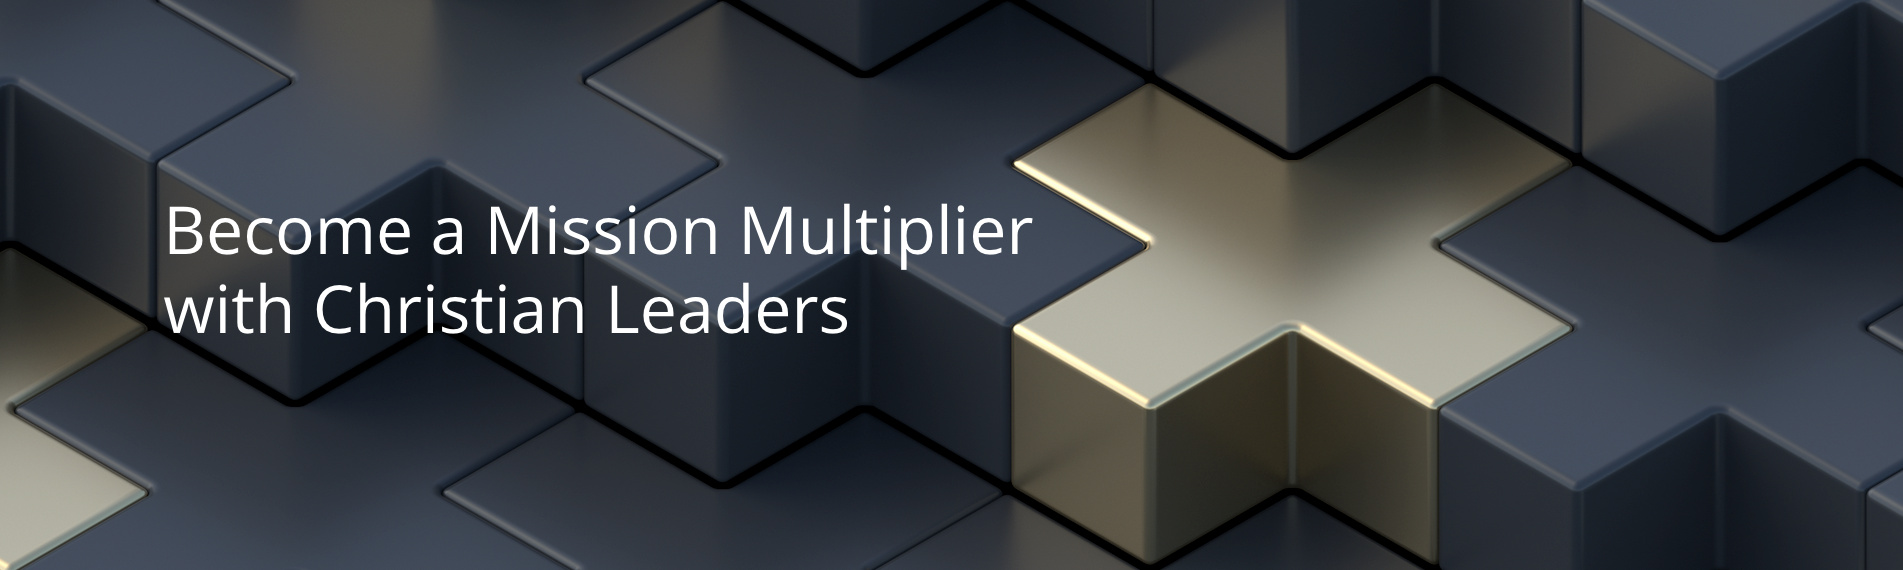 Become a Mission Multiplier Banner